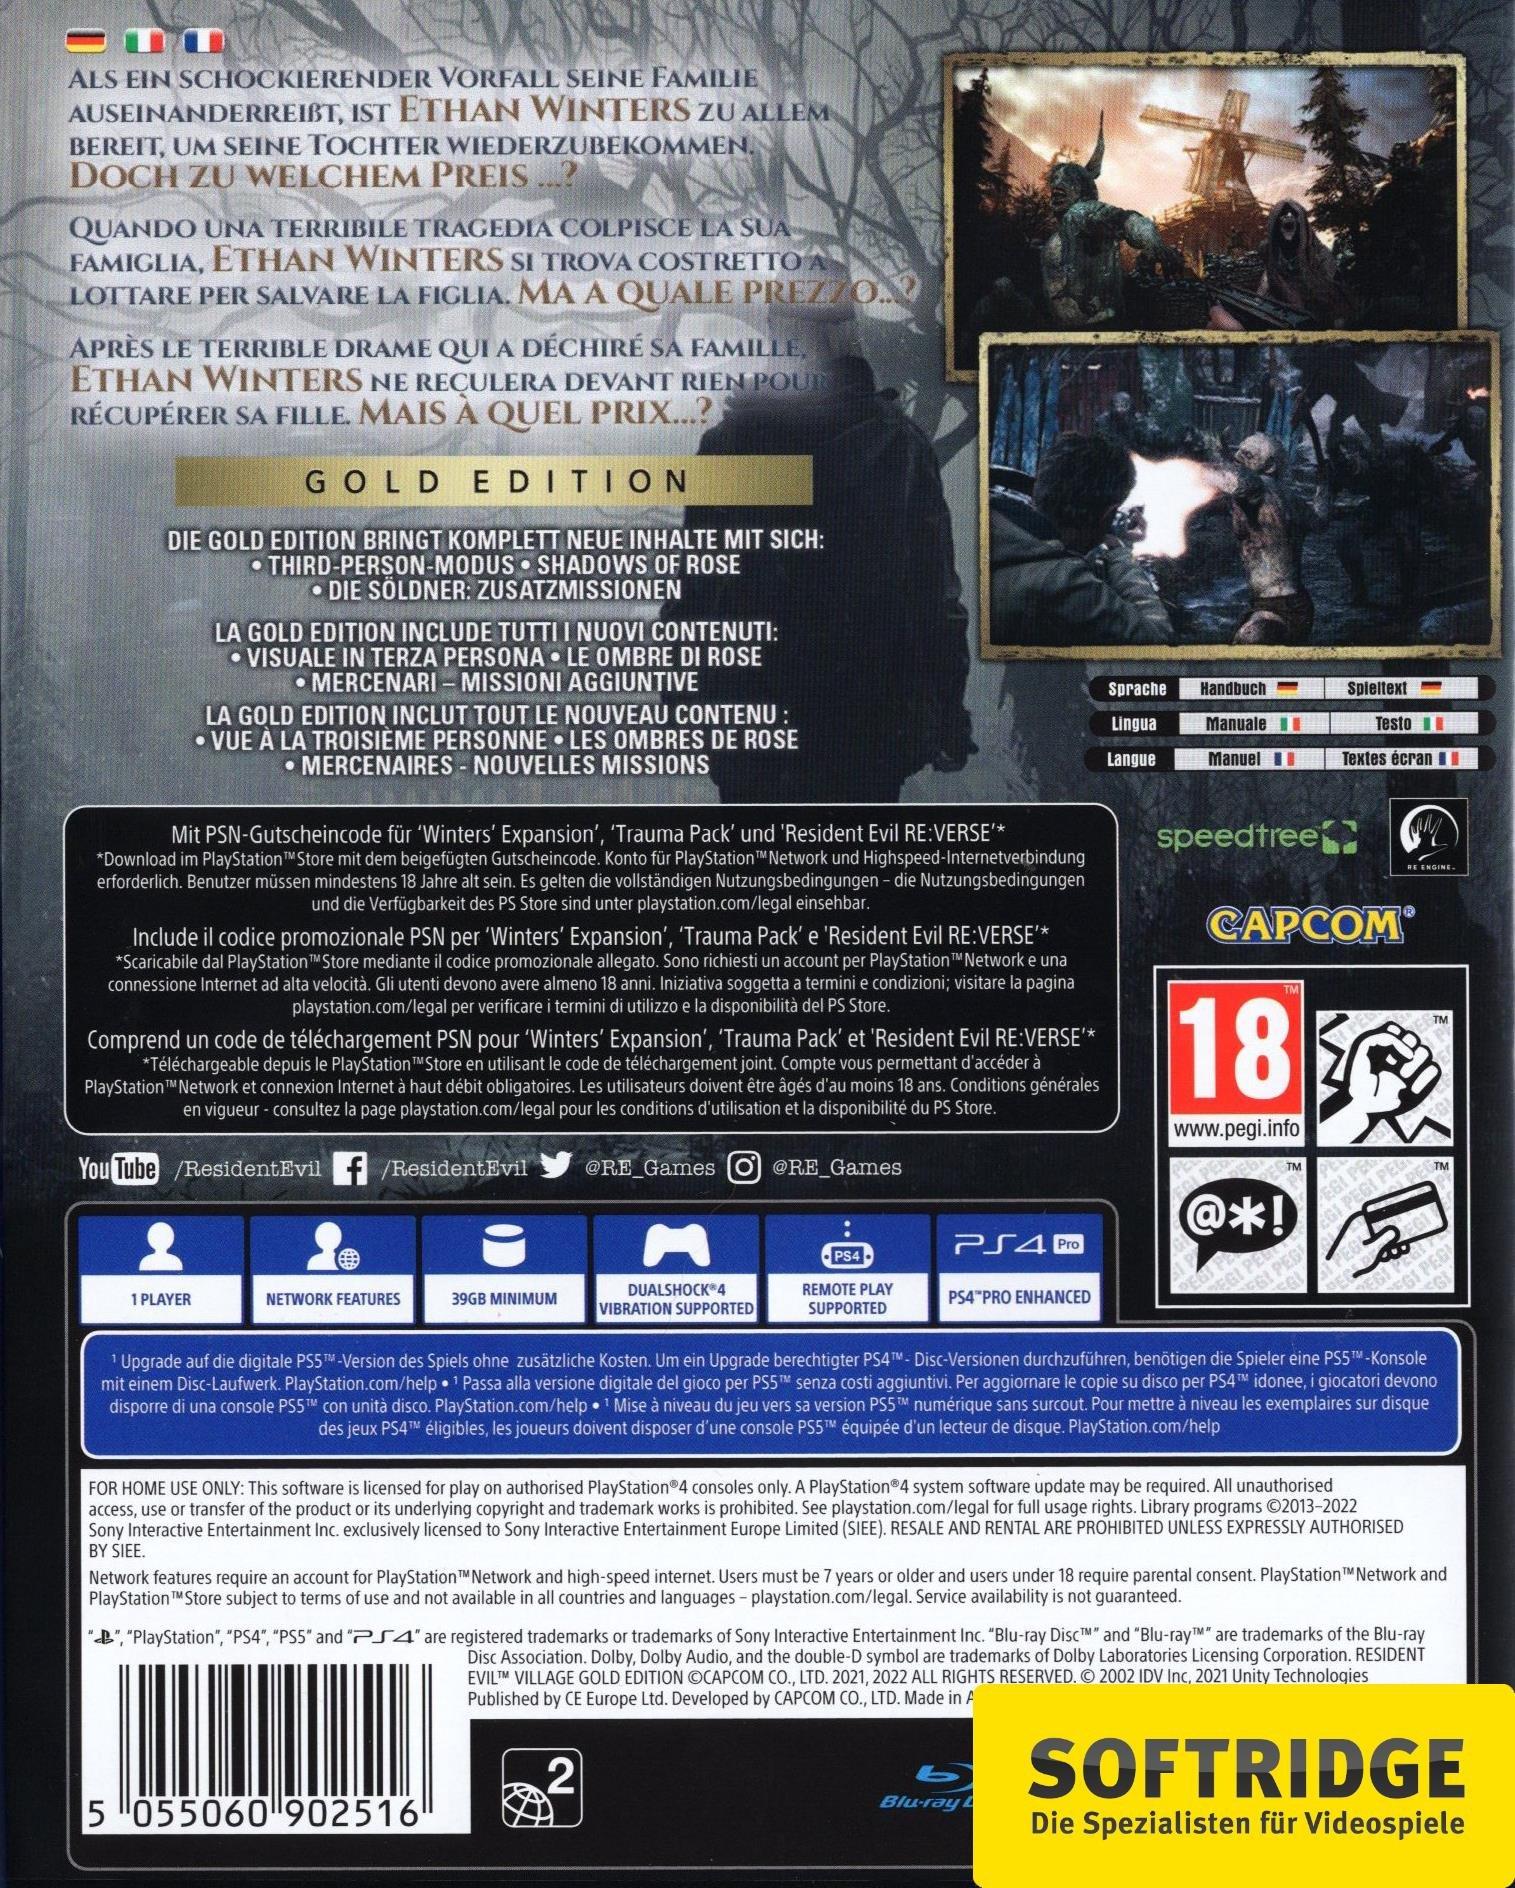 CAPCOM  Resident Evil 8 Village - Gold Edition (Free Upgrade to PS5) 